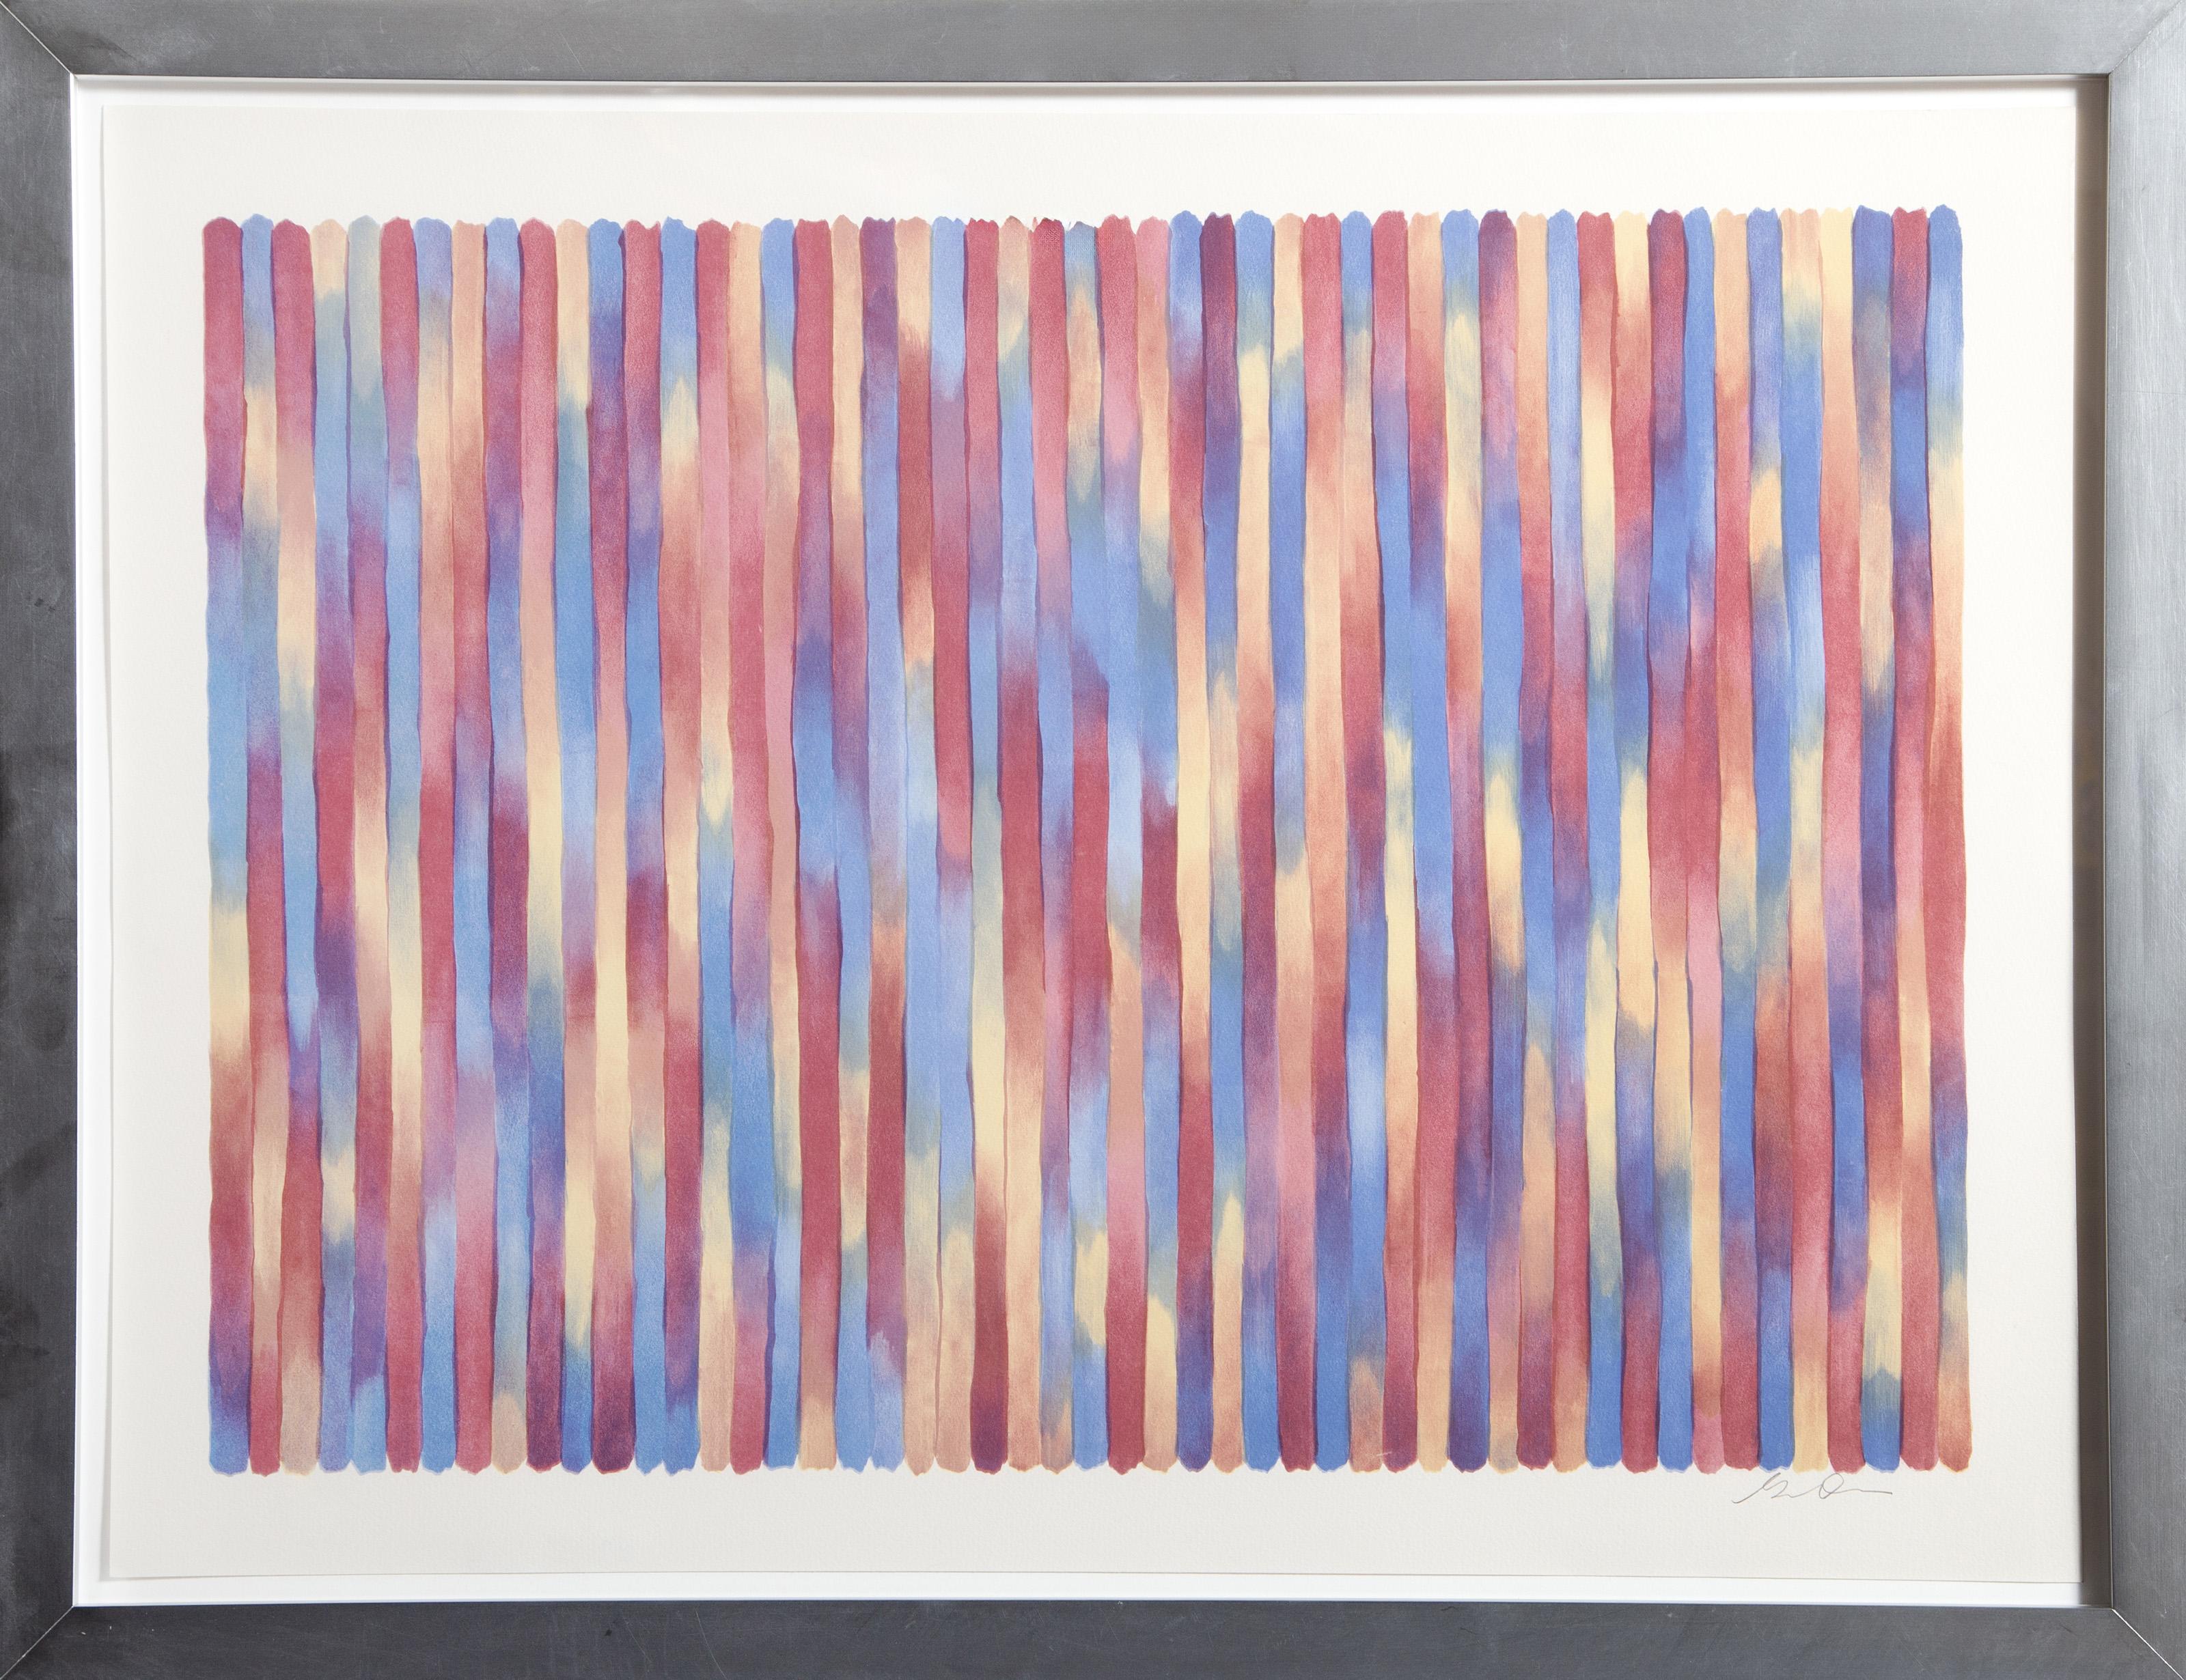 Gene Davis’s captivating Color Field compositions of vertical lines and evolving color is demonstrated in this print. Alternating from blue to yellow and then red, the vertical strips divide each section into individual trails of color that are